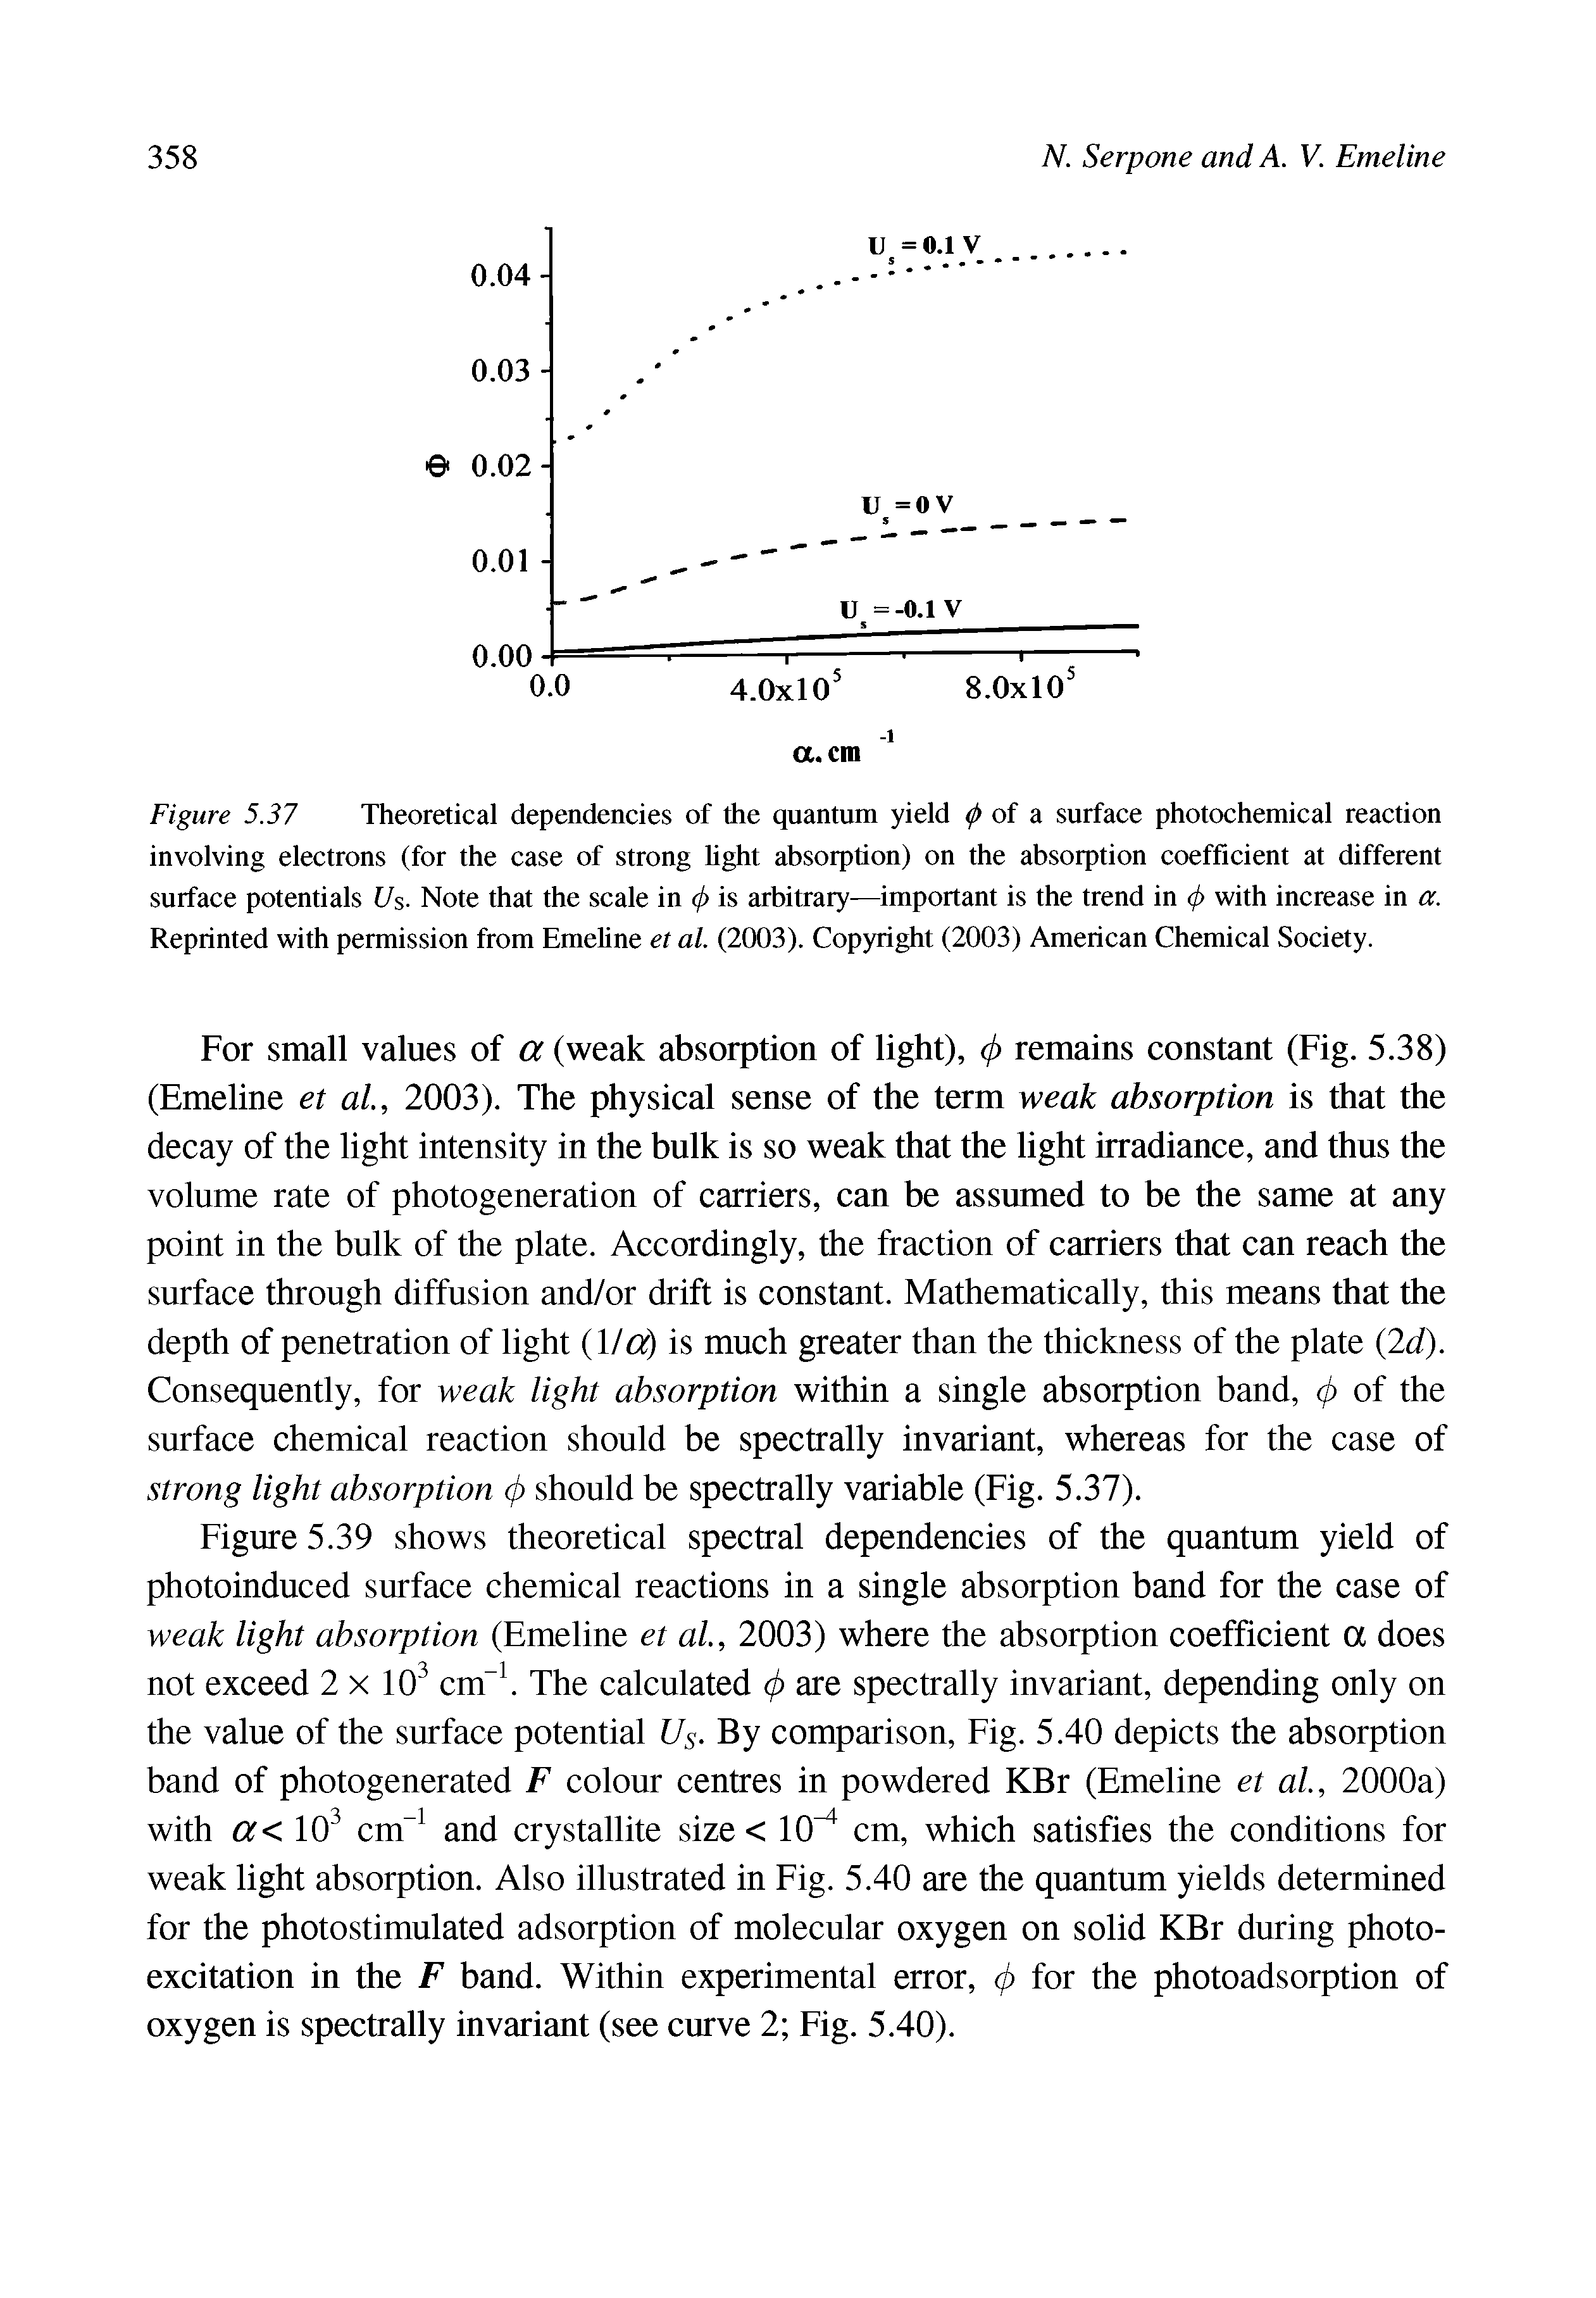 Figure 5.37 Theoretical dependencies of the quantum yield of a surface photochemical reaction involving electrons (for the case of strong light absorption) on the absorption coefficient at different surface potentials t/s. Note that the scale in 0 is arbitrary—important is the trend in 0 with increase in a. Reprinted with permission from Emeline et al. (2003). Copyright (2003) American Chemical Society.